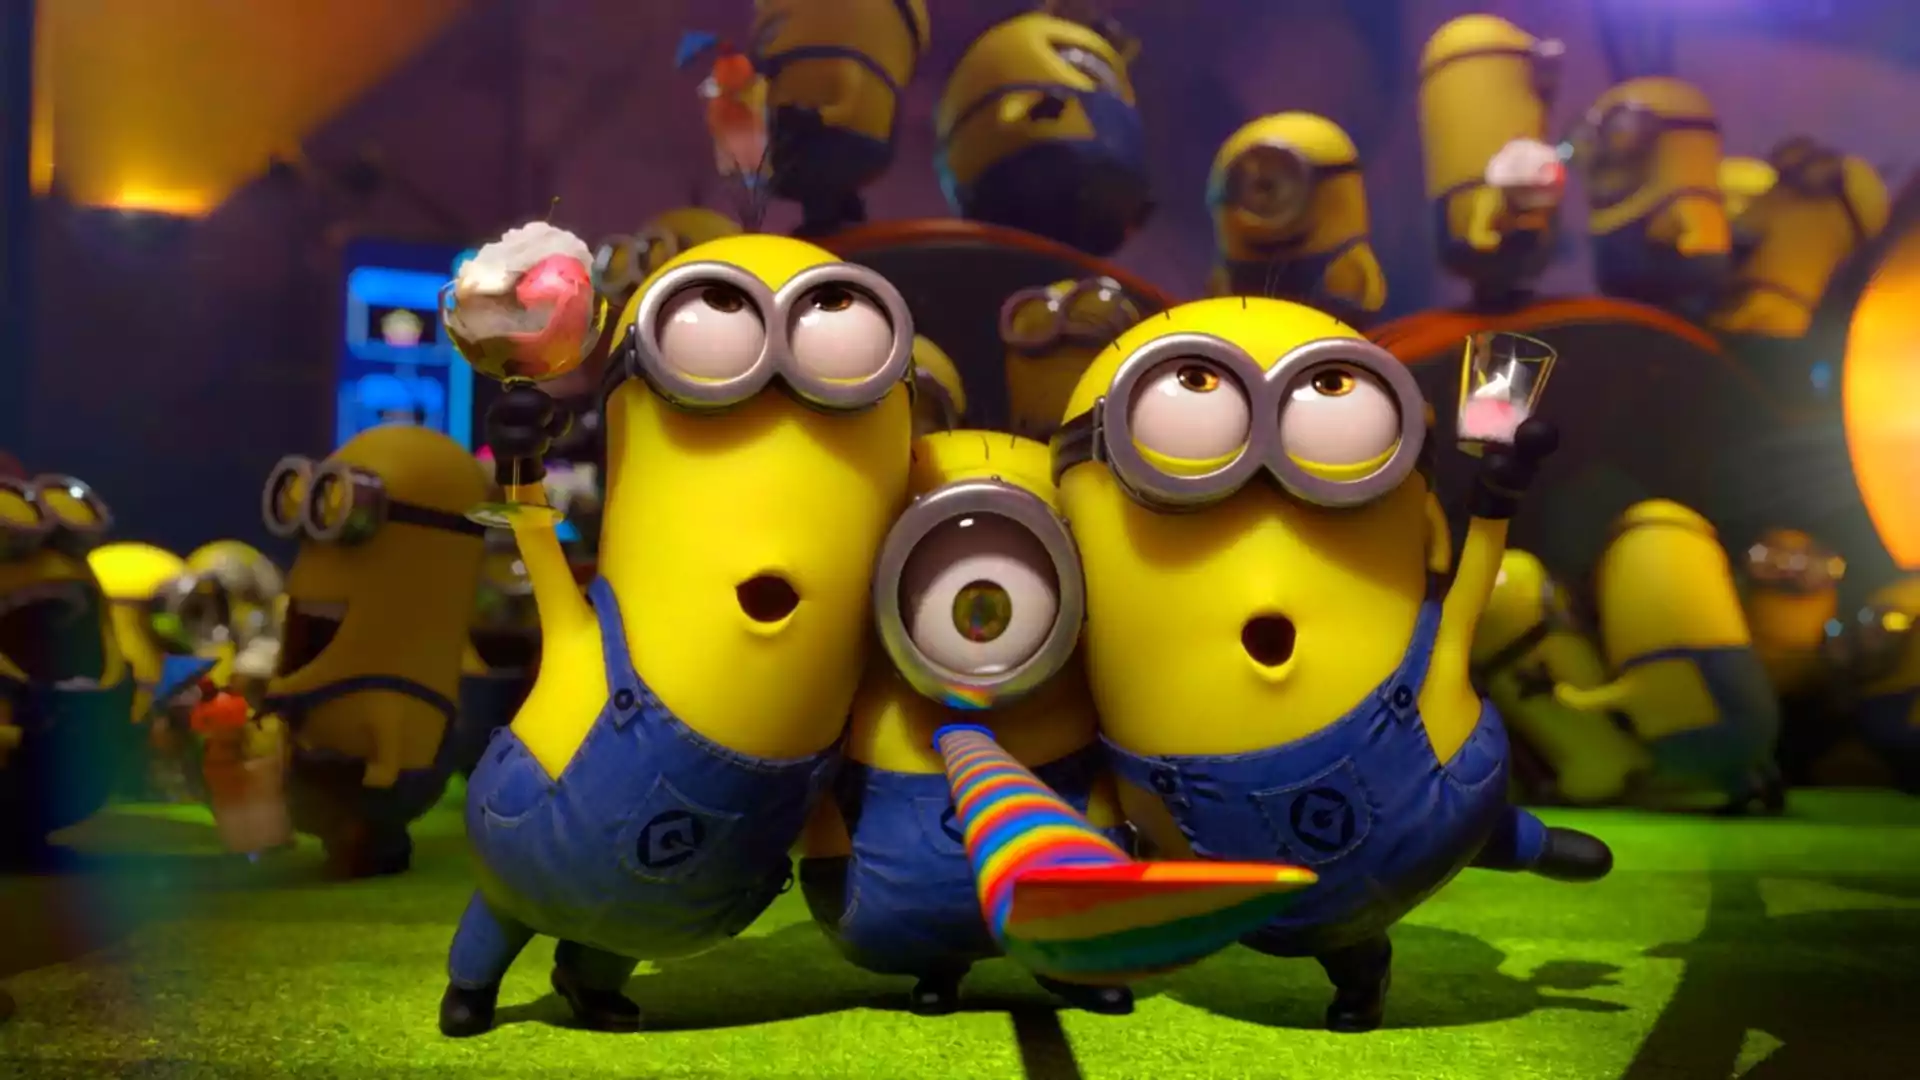 Despicable Me 2 Parents Guide and age rating | 2013